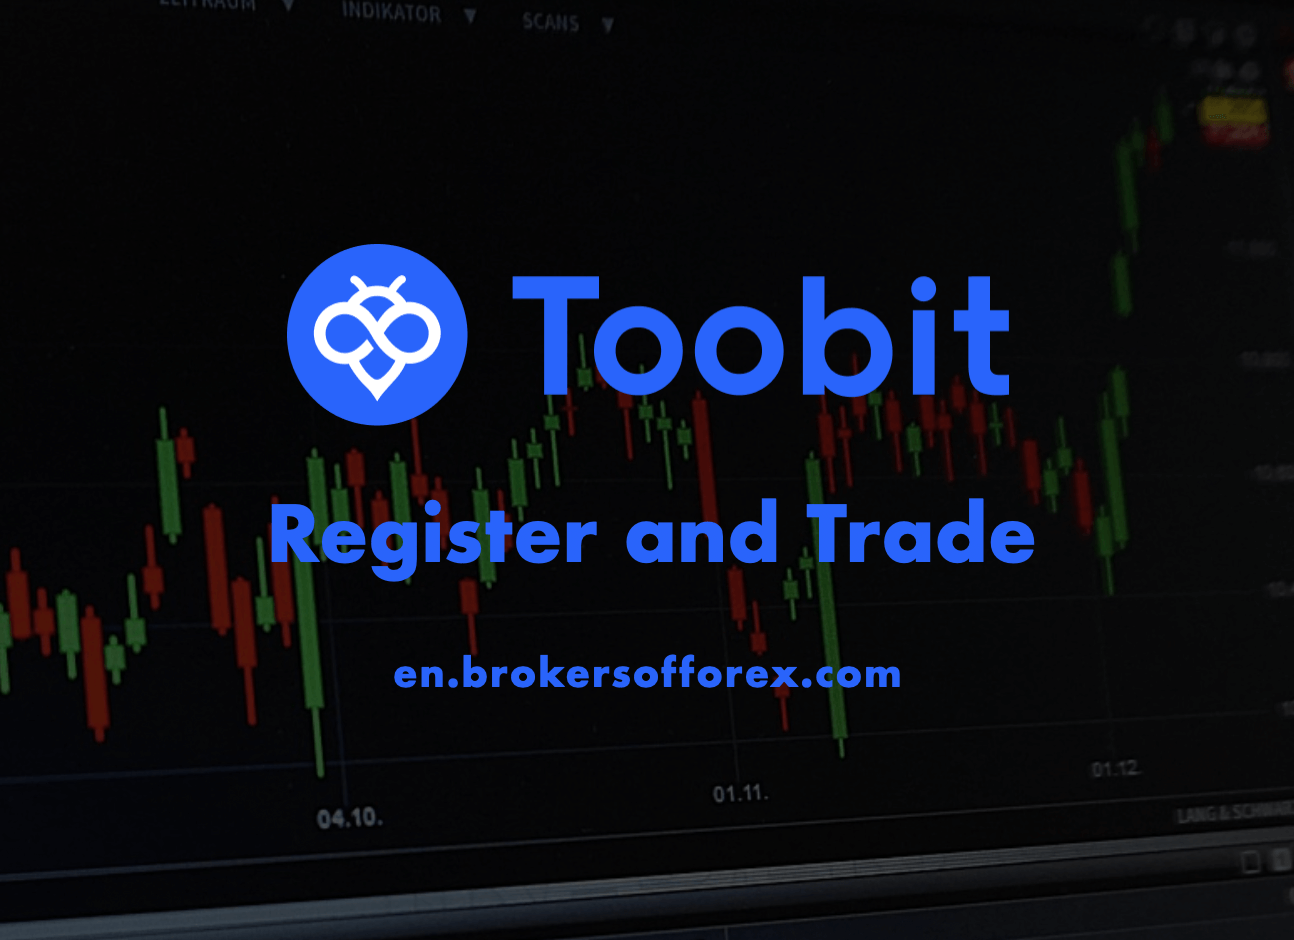 Toobit Register and Trade